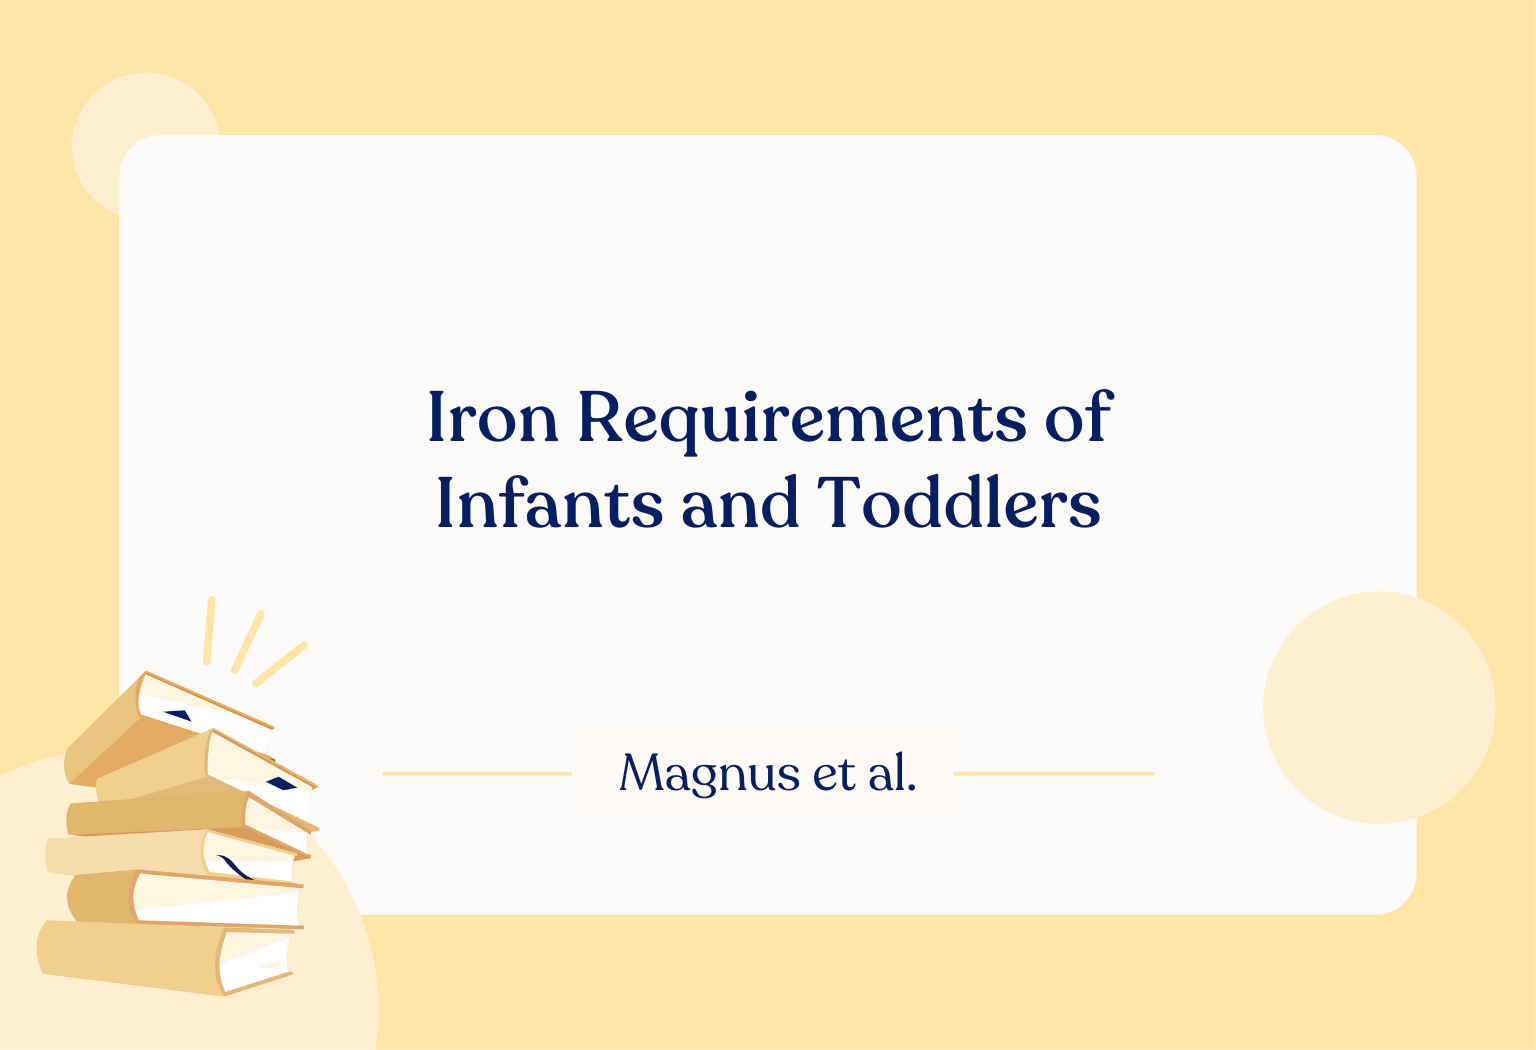 Iron Requirements of Infants and Toddlers